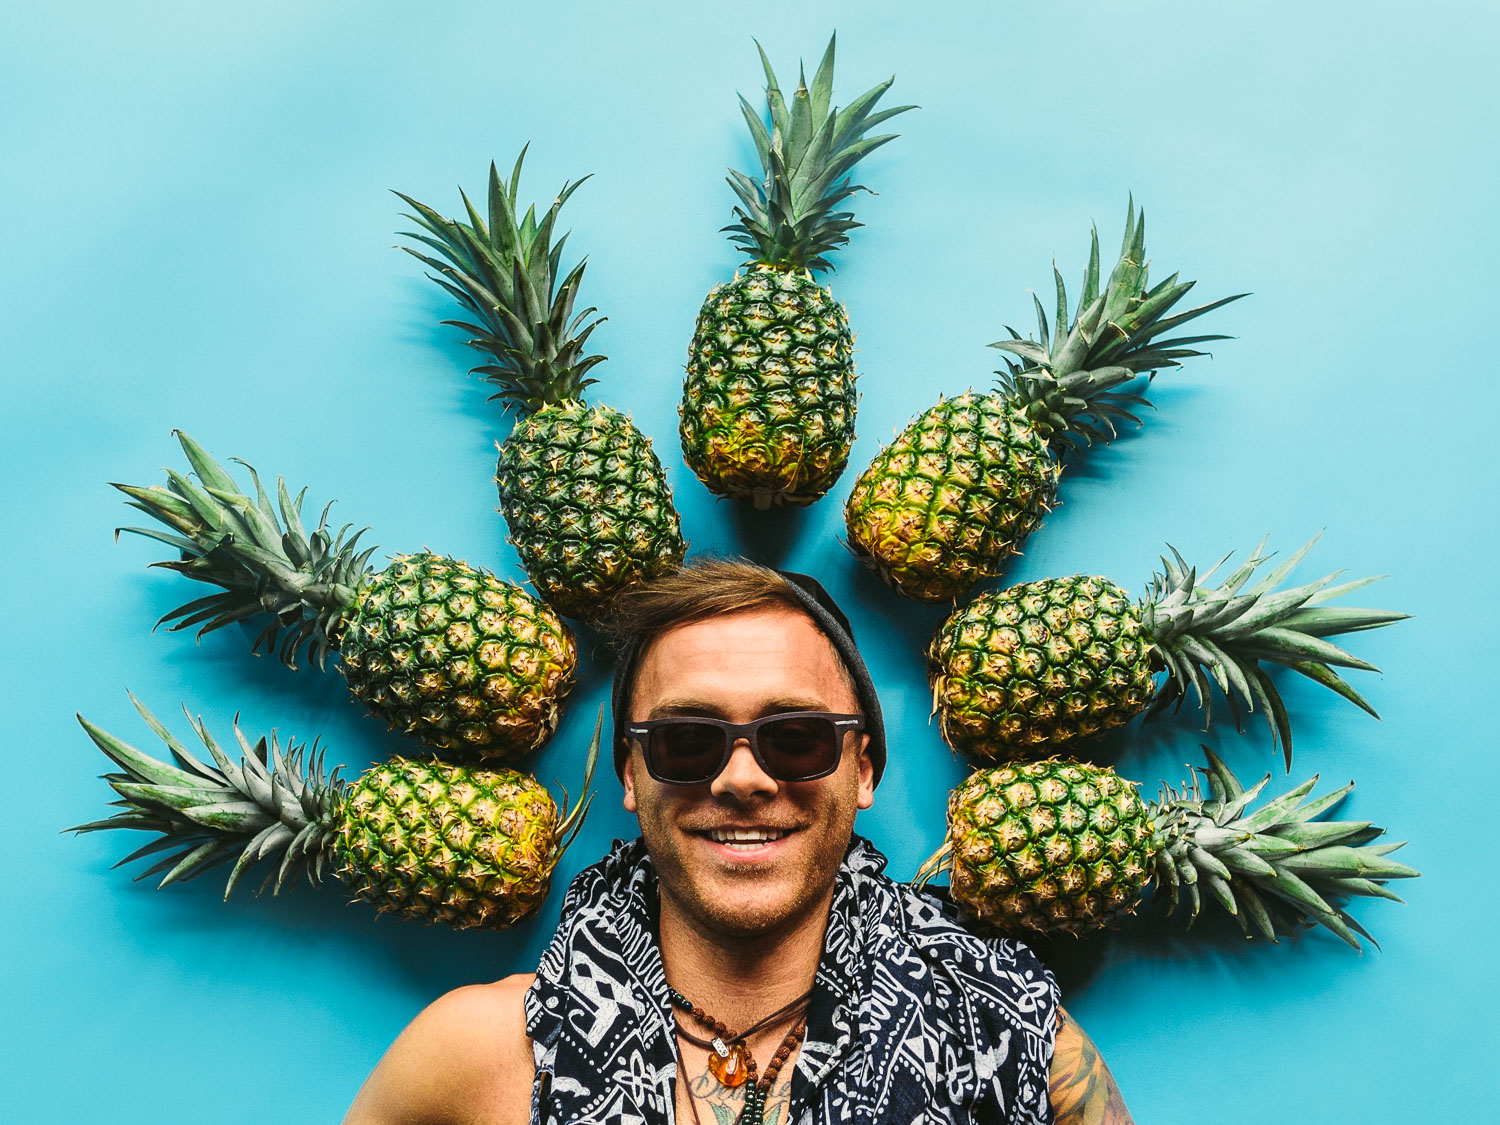 Artwalk 2018 May Pineapple Pyramid Man wearing a black knit cap smiling posing for camera with pineapples surrounding his head on a teal background